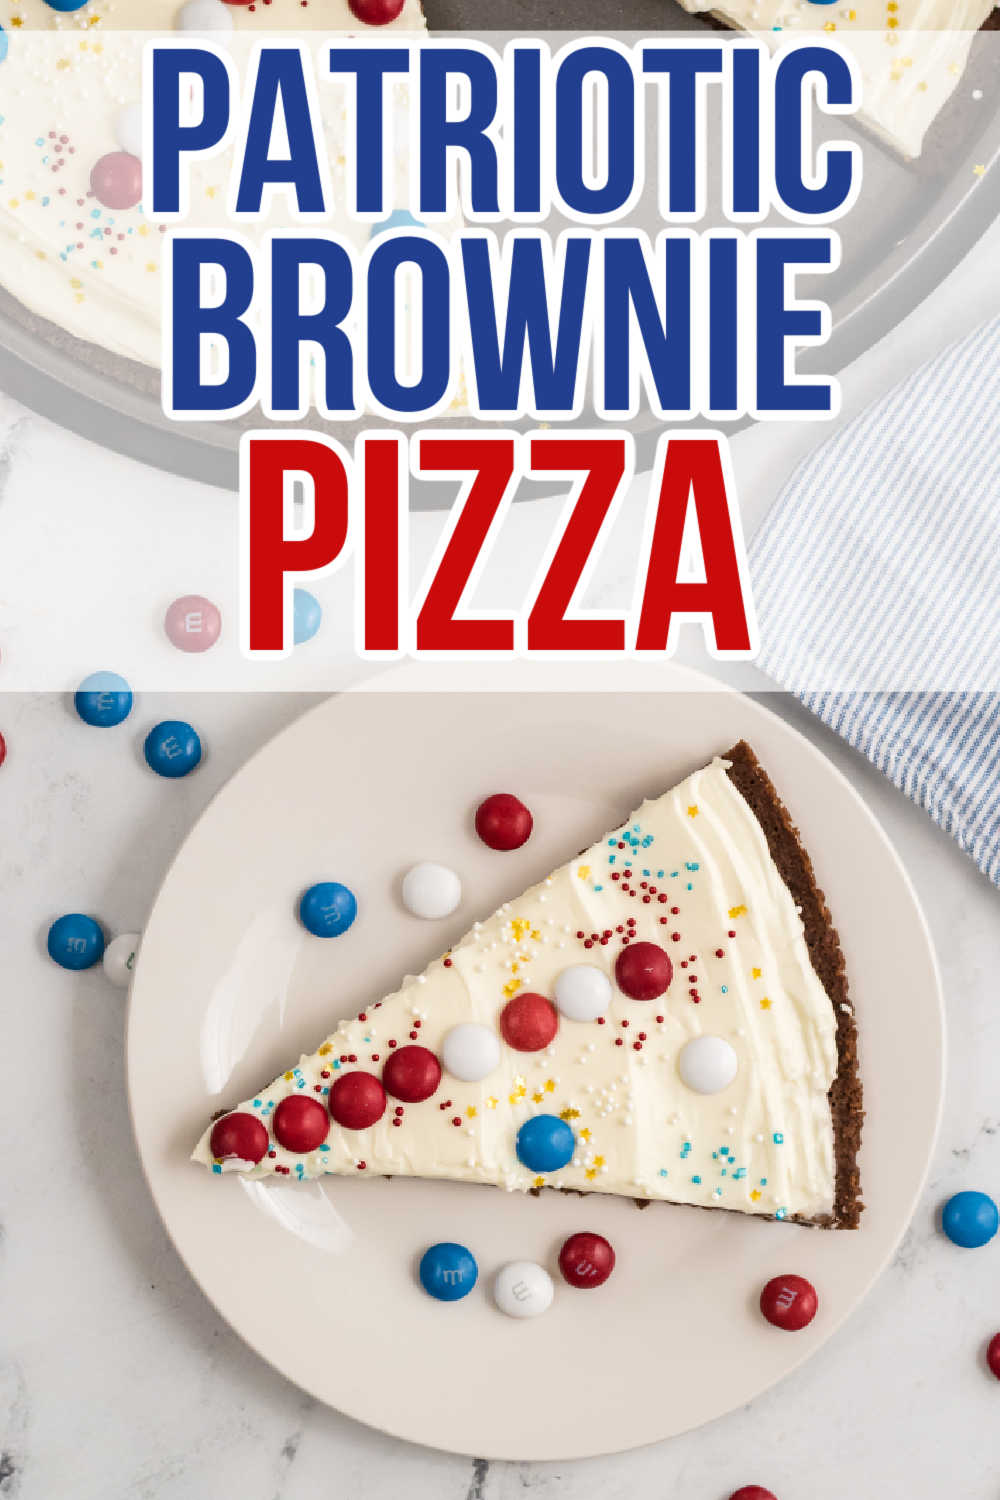 Top says "Patriotic Brownie Pizza" and bottom has a slice of brownie pizza.